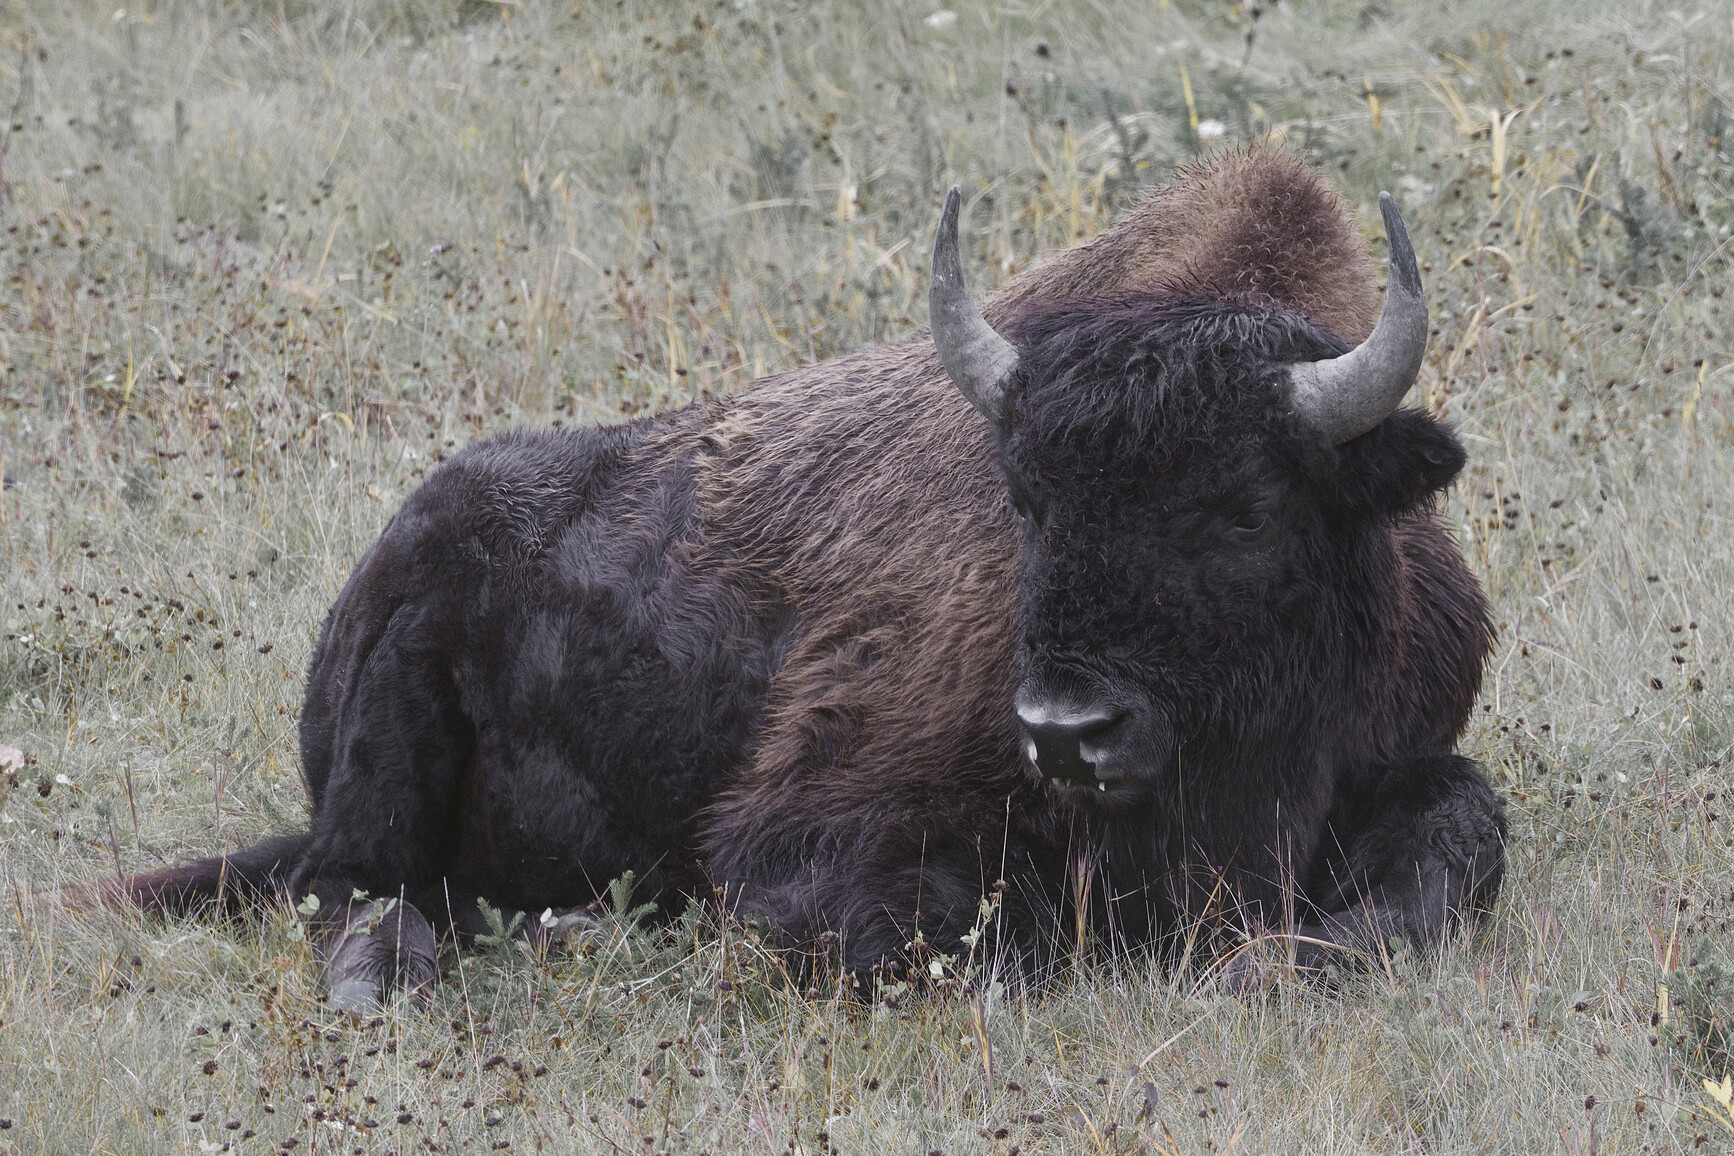 Wood bison (bison athabascae) laying in the grass.